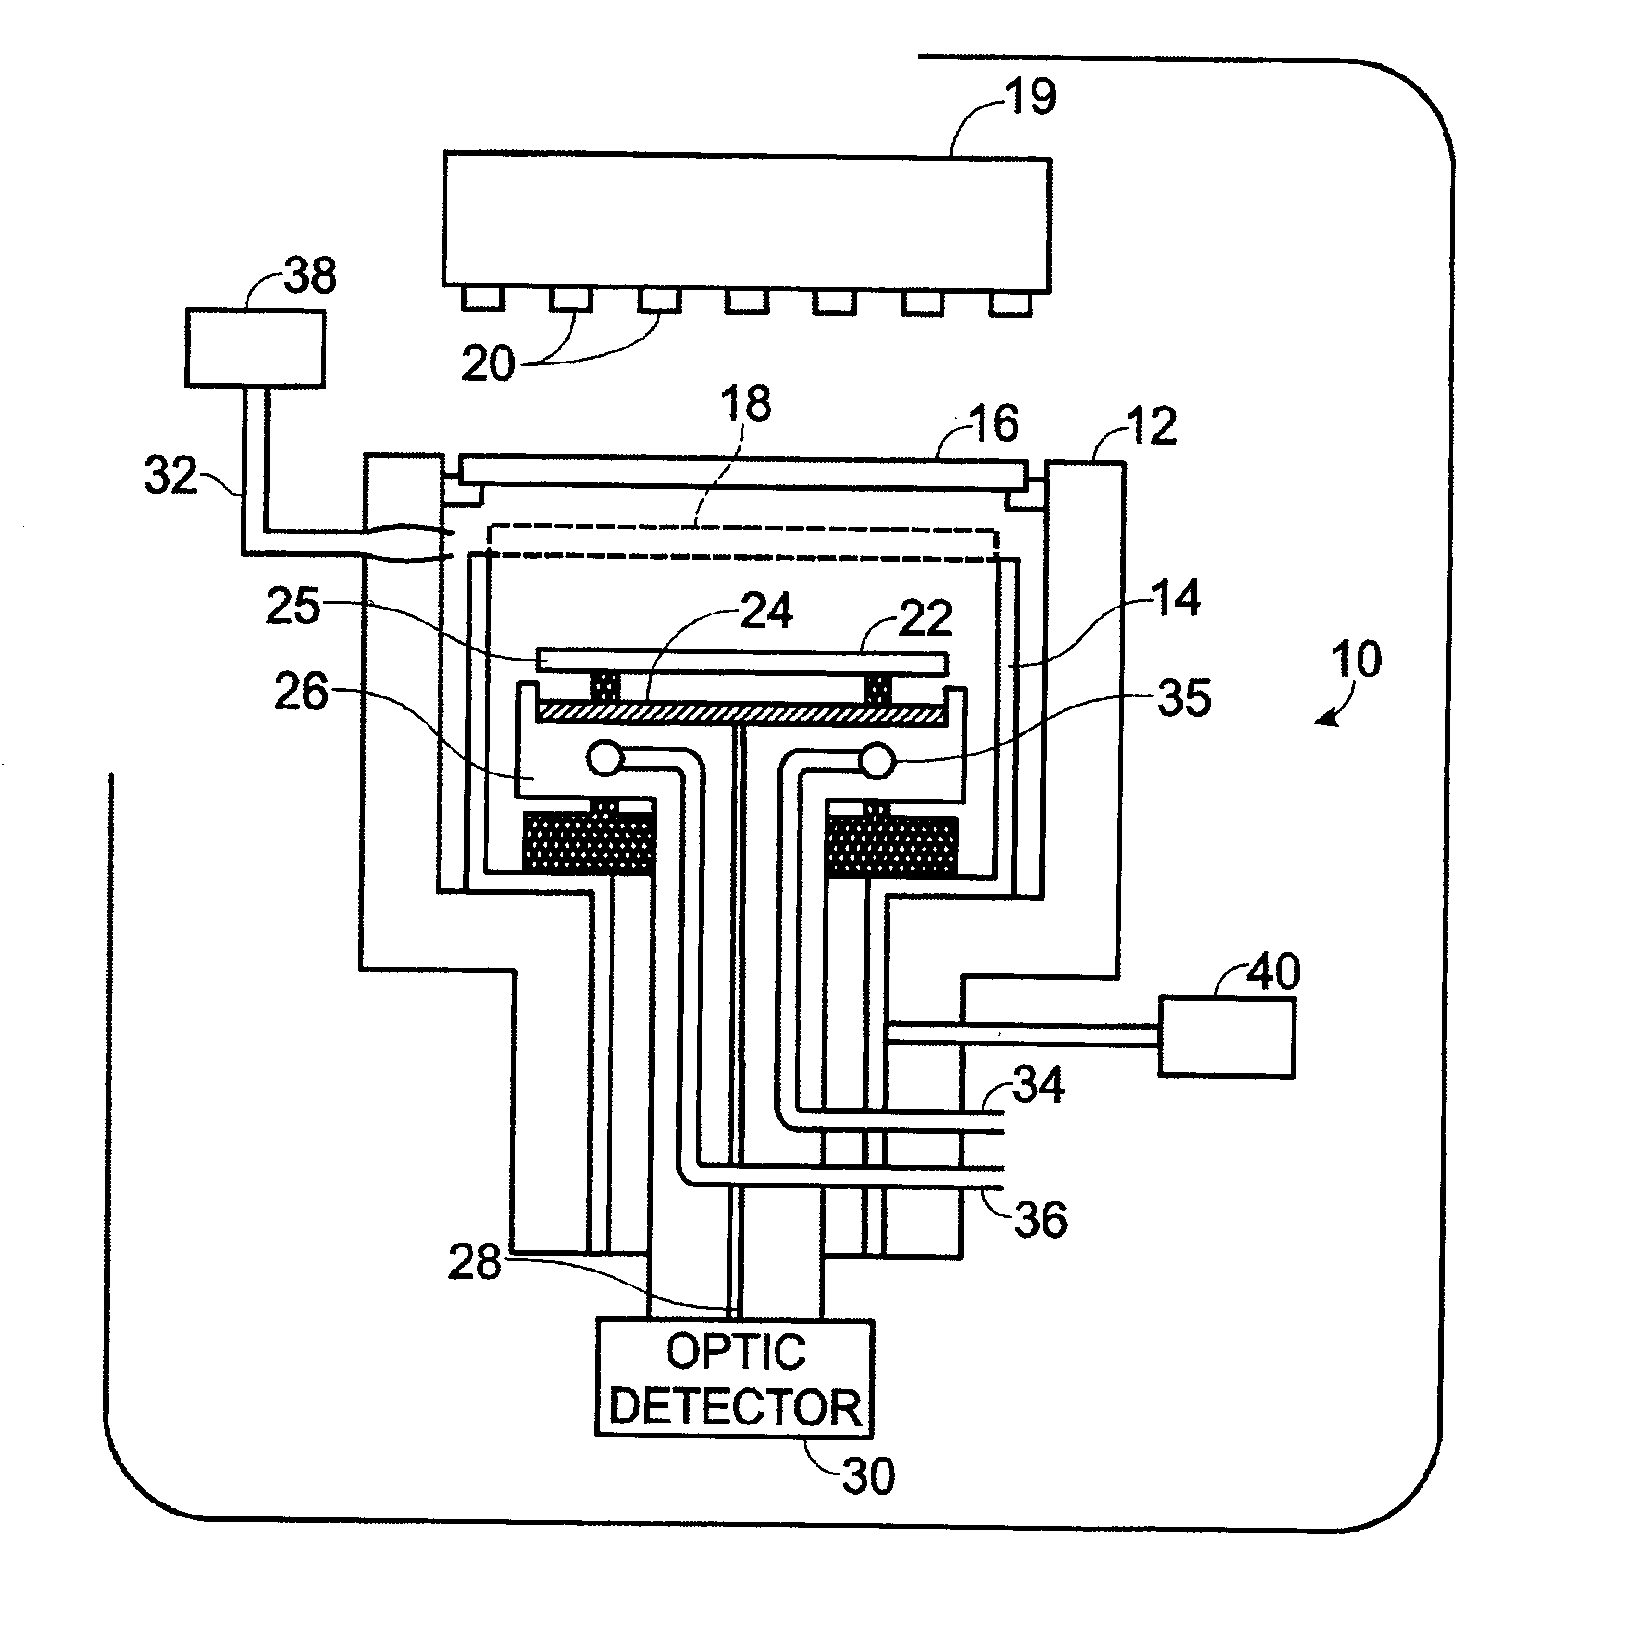 Method of processing selected surfaces in a semiconductor process chamber based on a temperature differential between surfaces